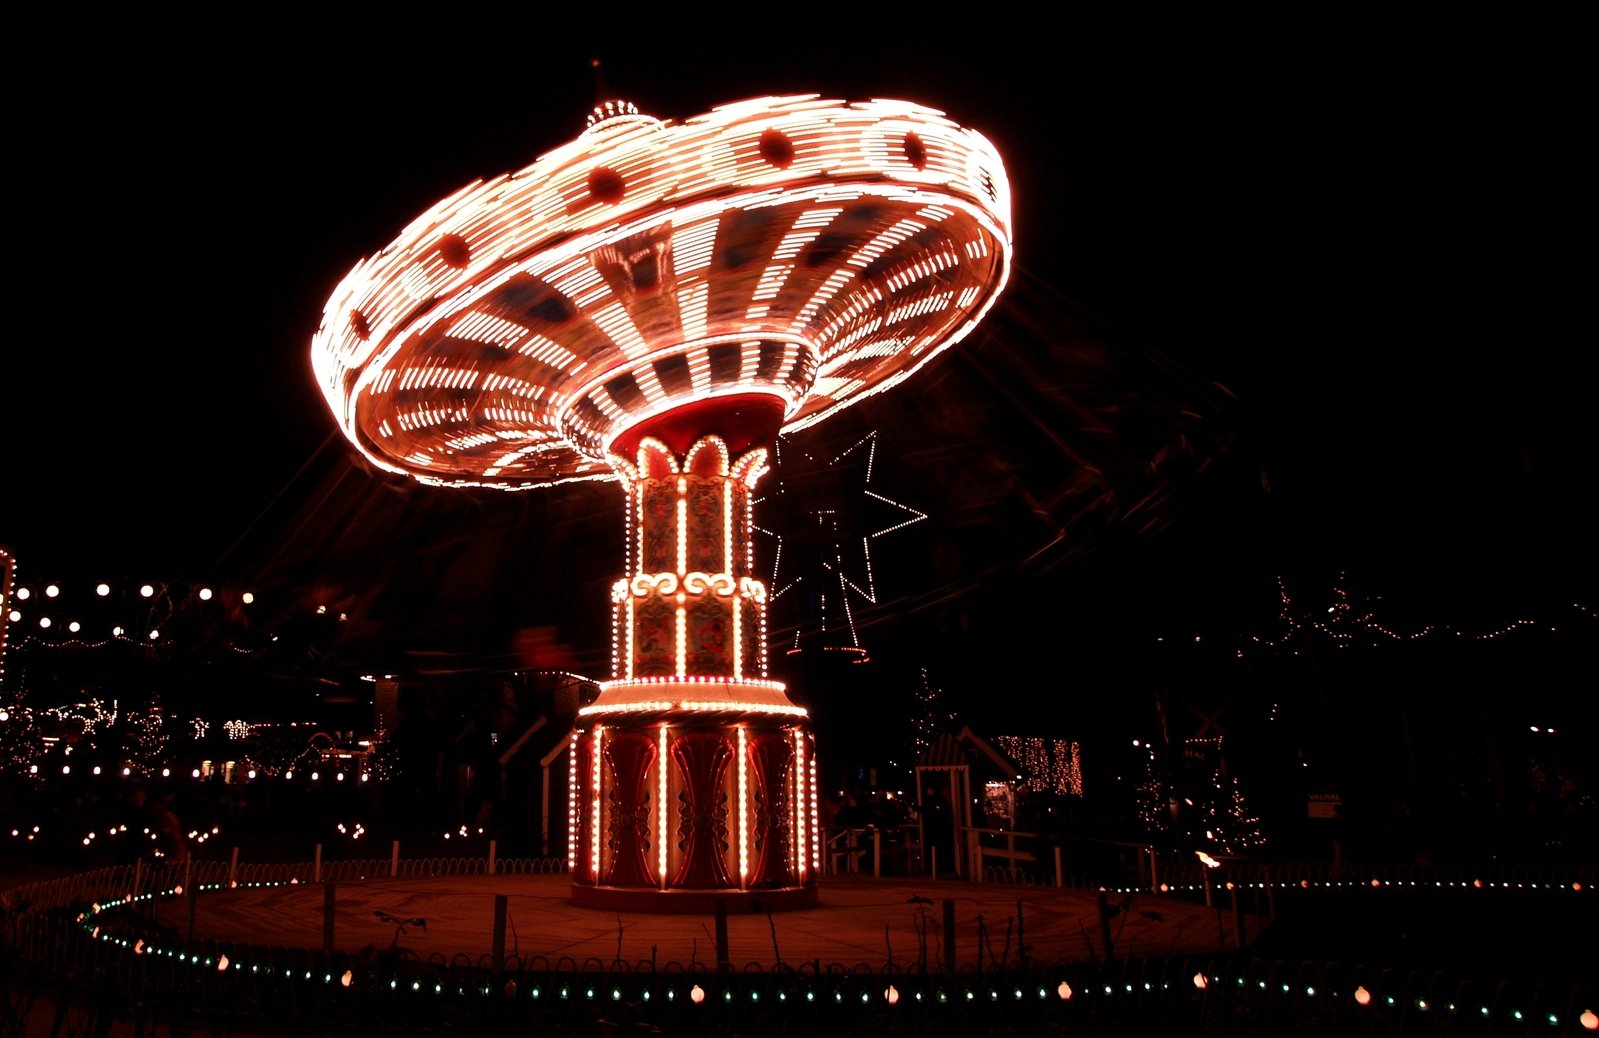 a merry go round with lights on at night